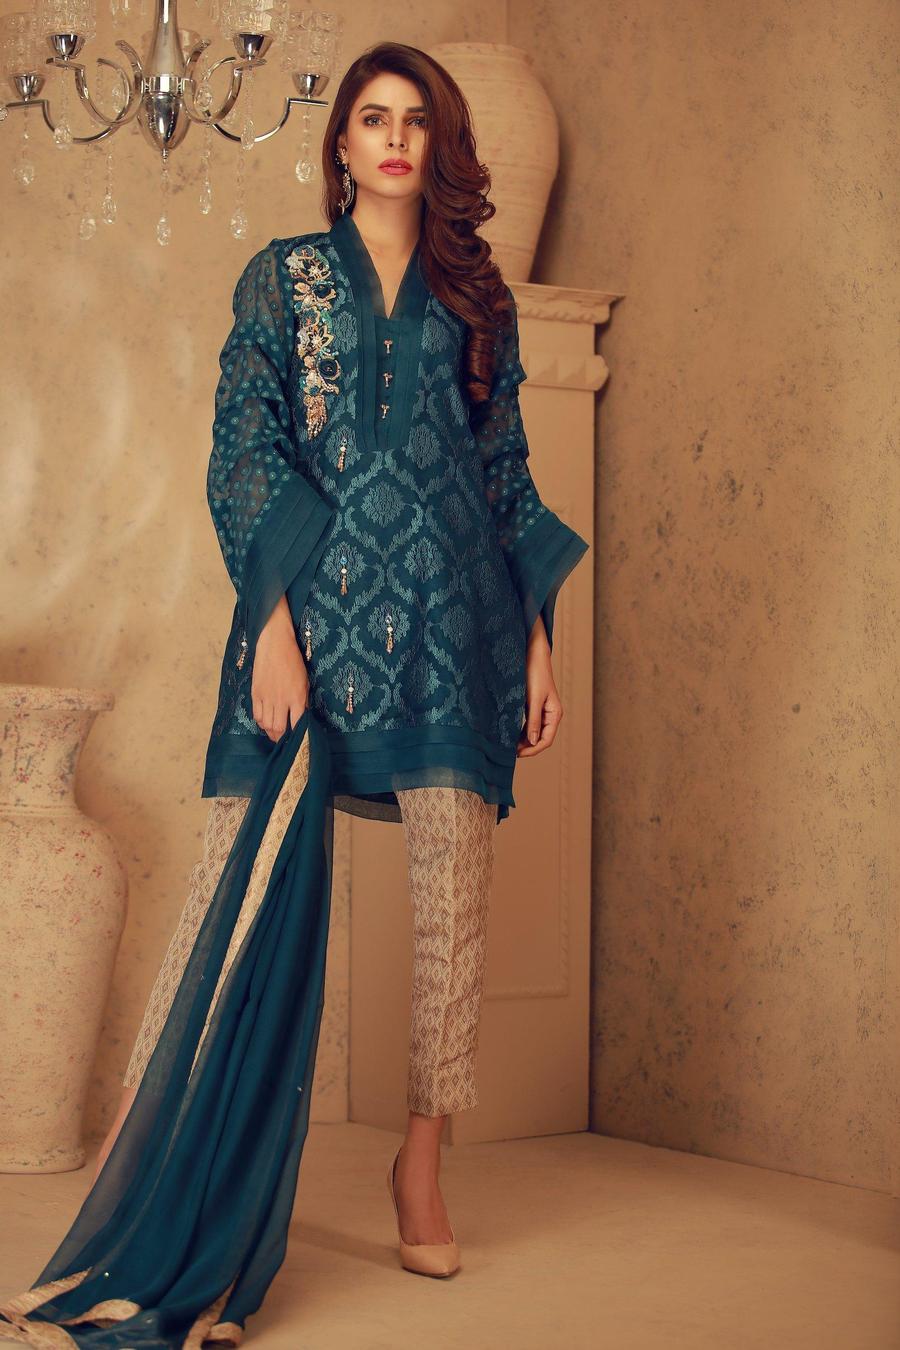 Pakistani Party Dresses by Sarosh Salman features this Peacock Green Luxe Pret 